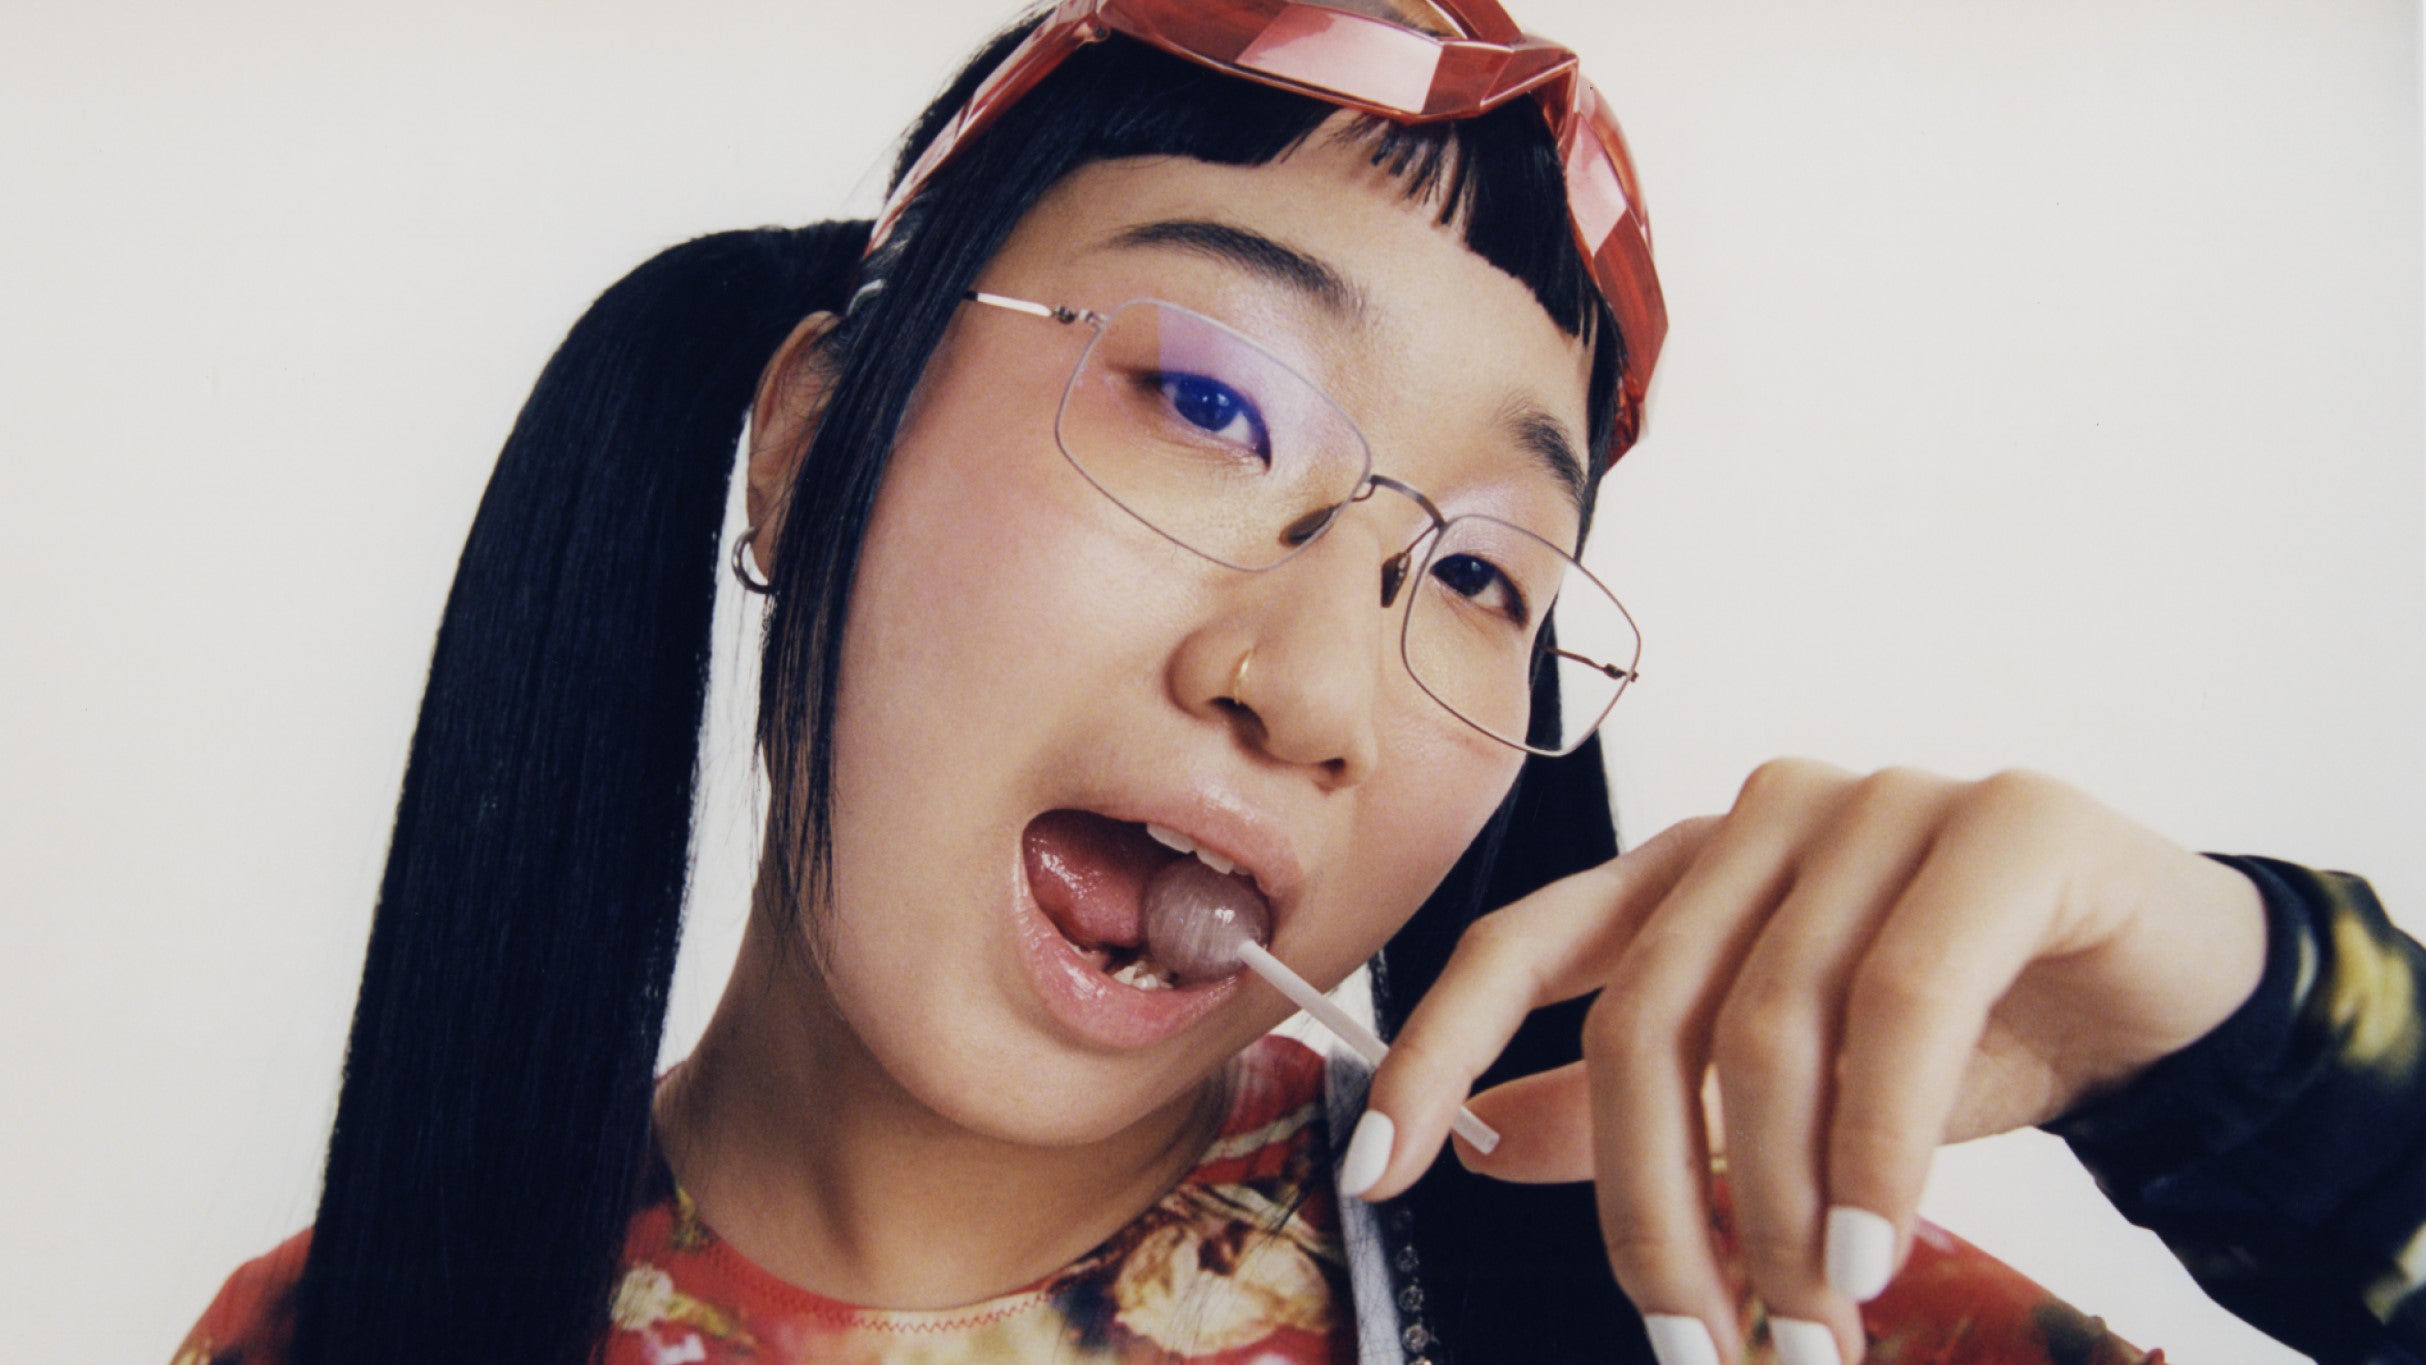 members only presale code for Yaeji face value tickets in Toronto at The Danforth Music Hall